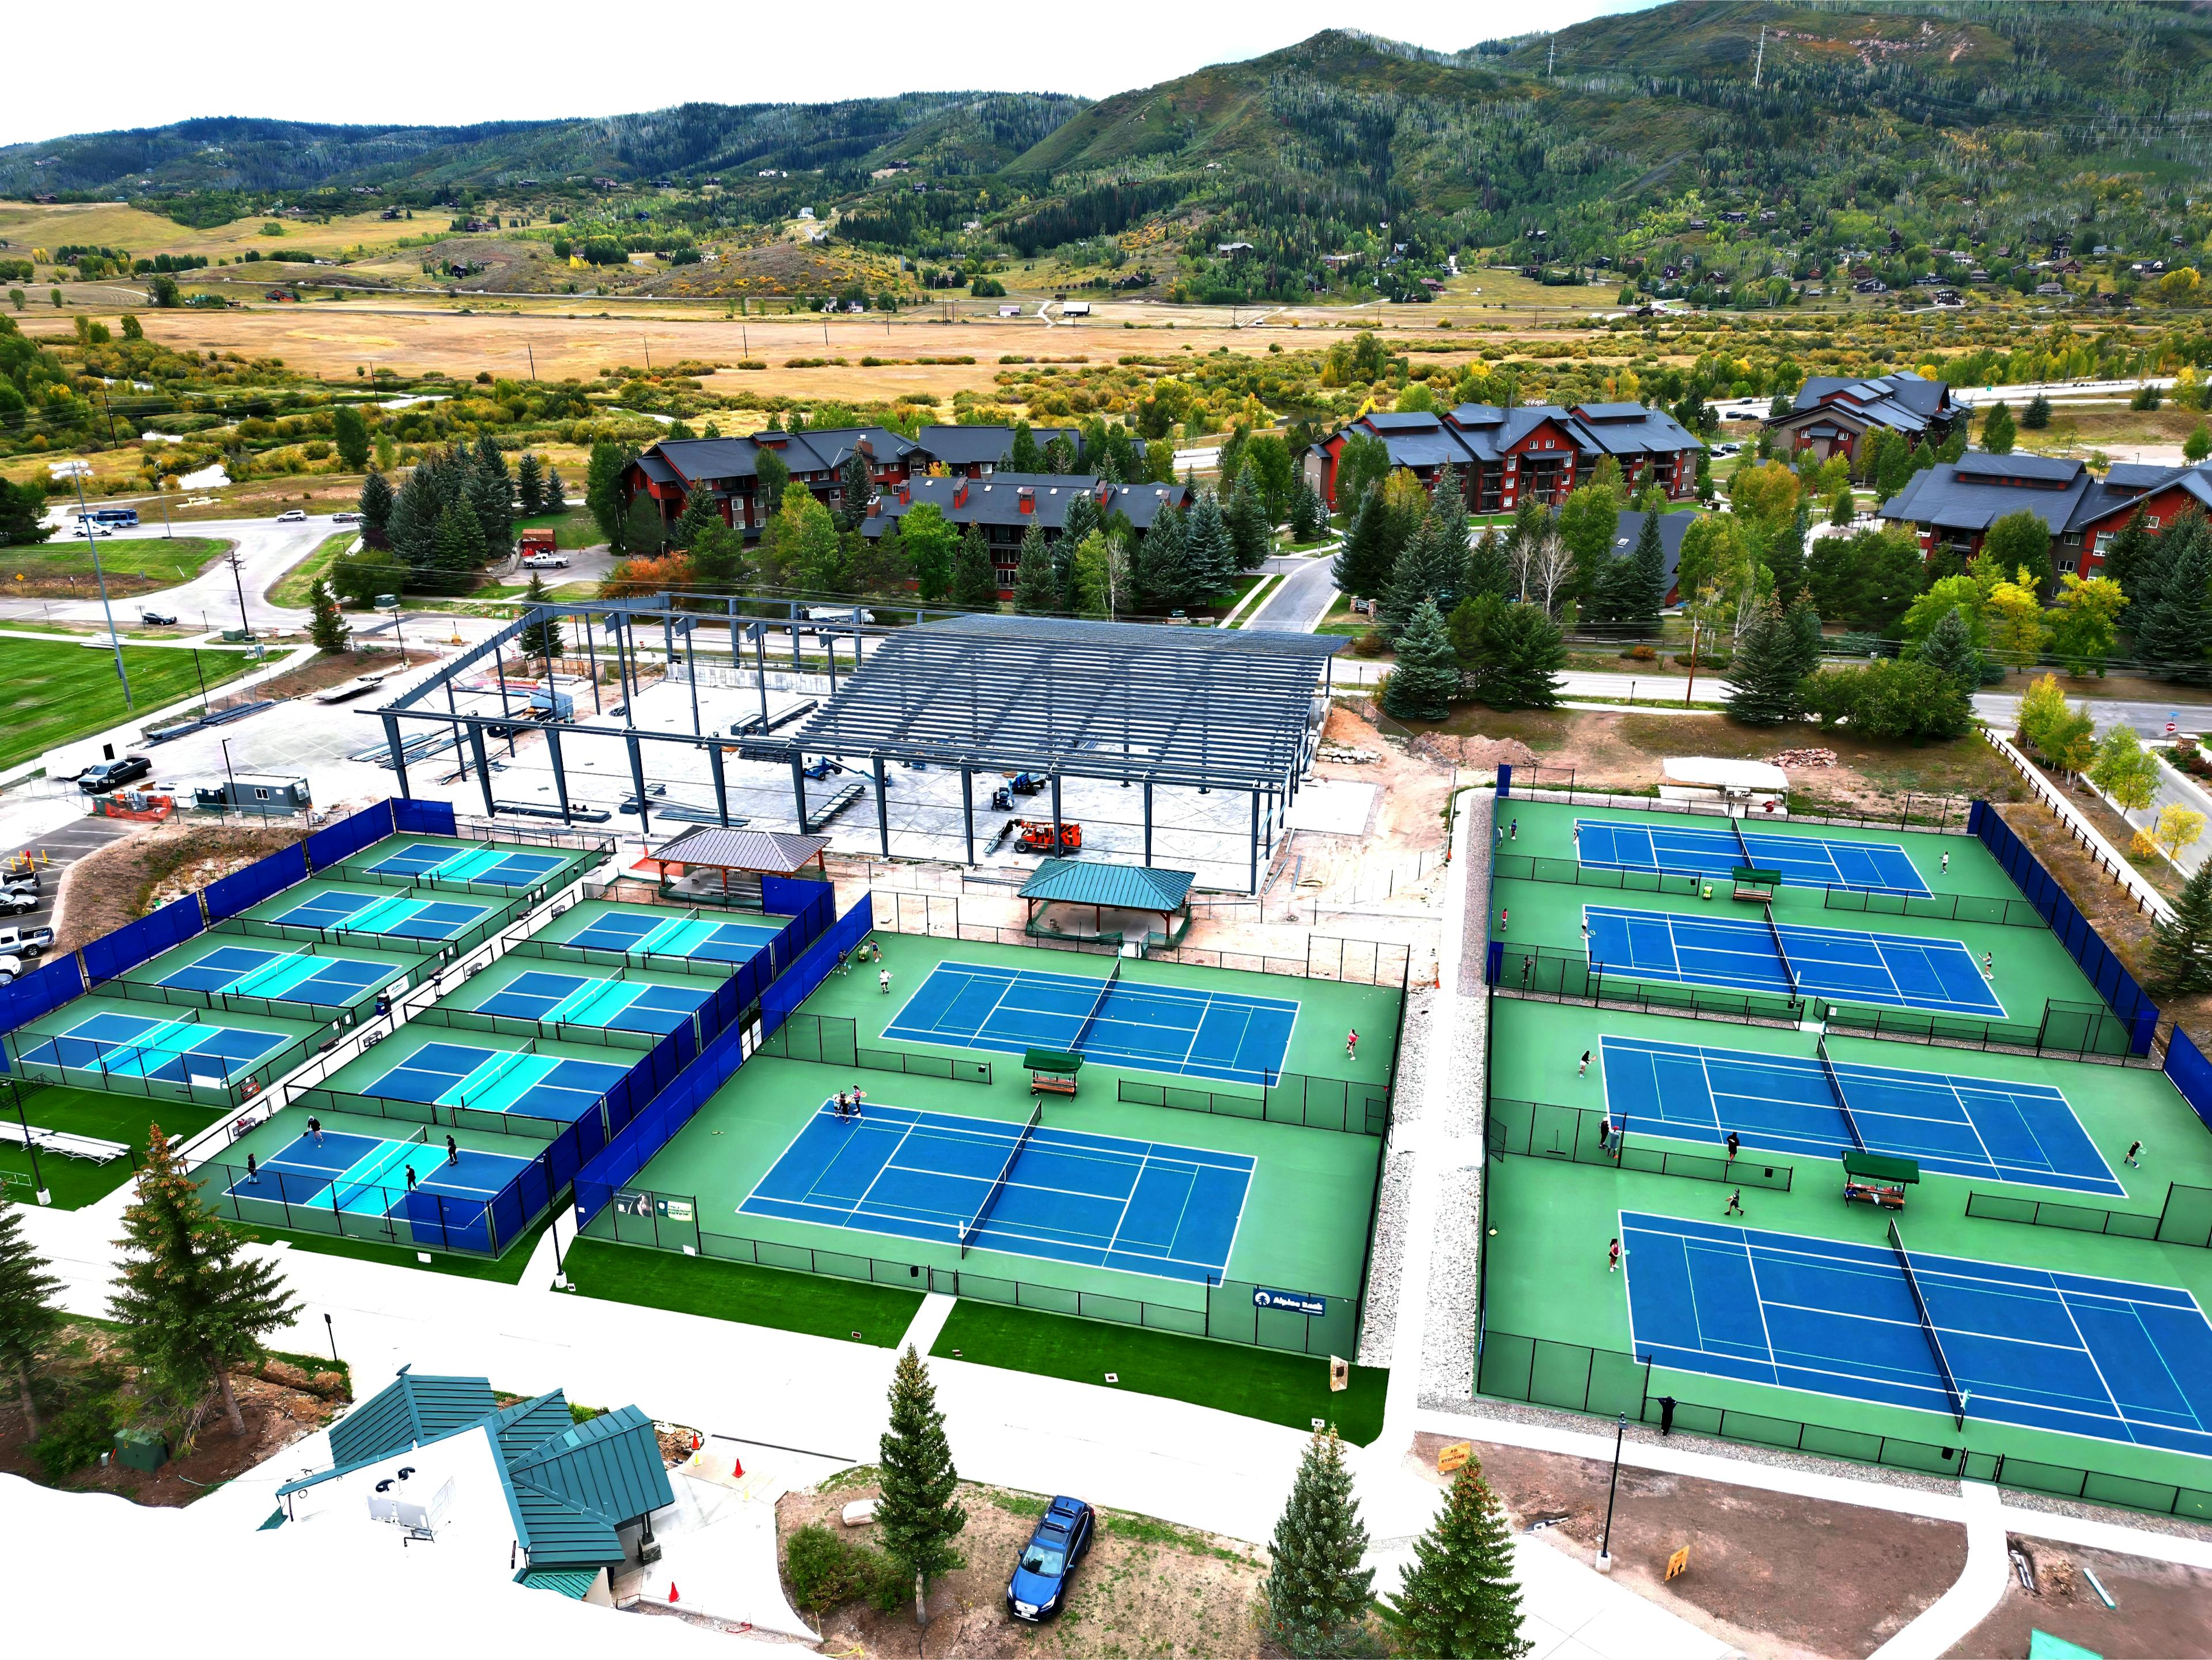 Steamboat Springs Tennis and Pickleball Center